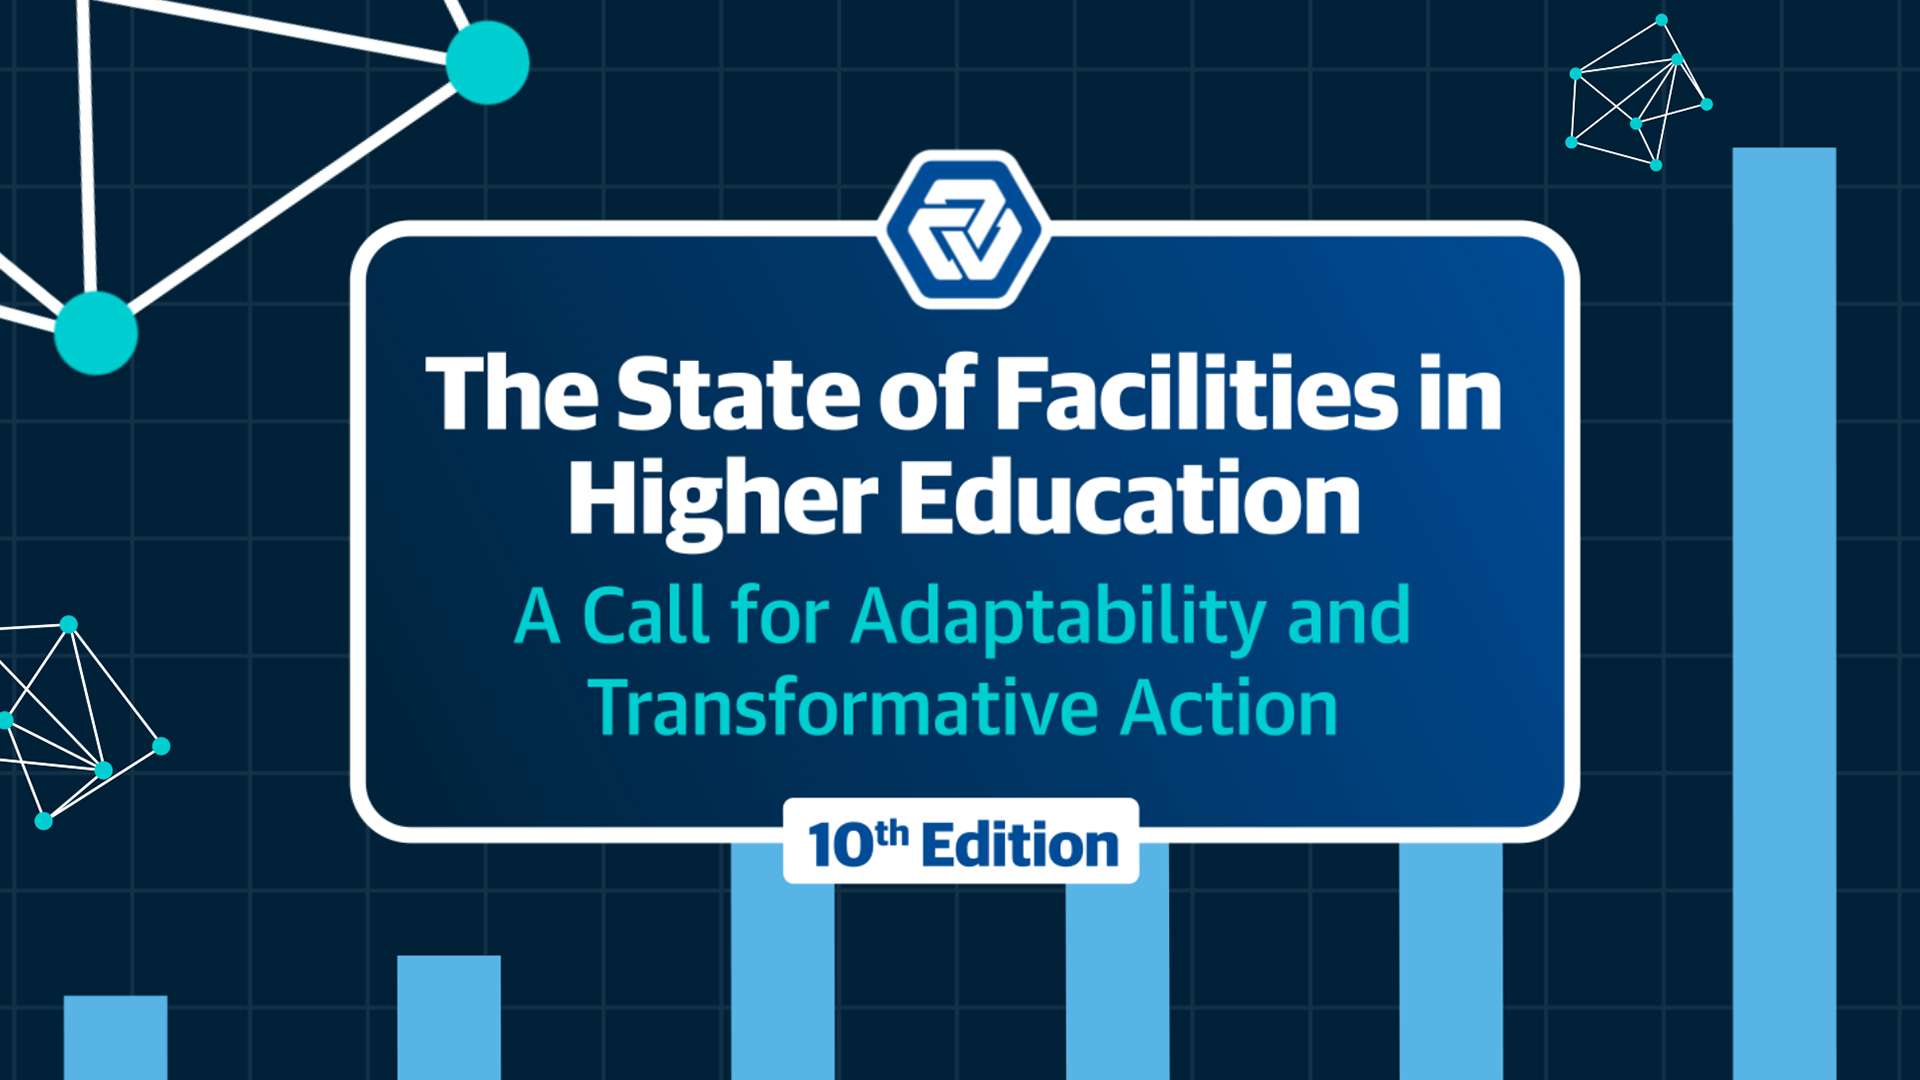 Q&A: Reflecting on the “State of Facilities in Higher Education” 1